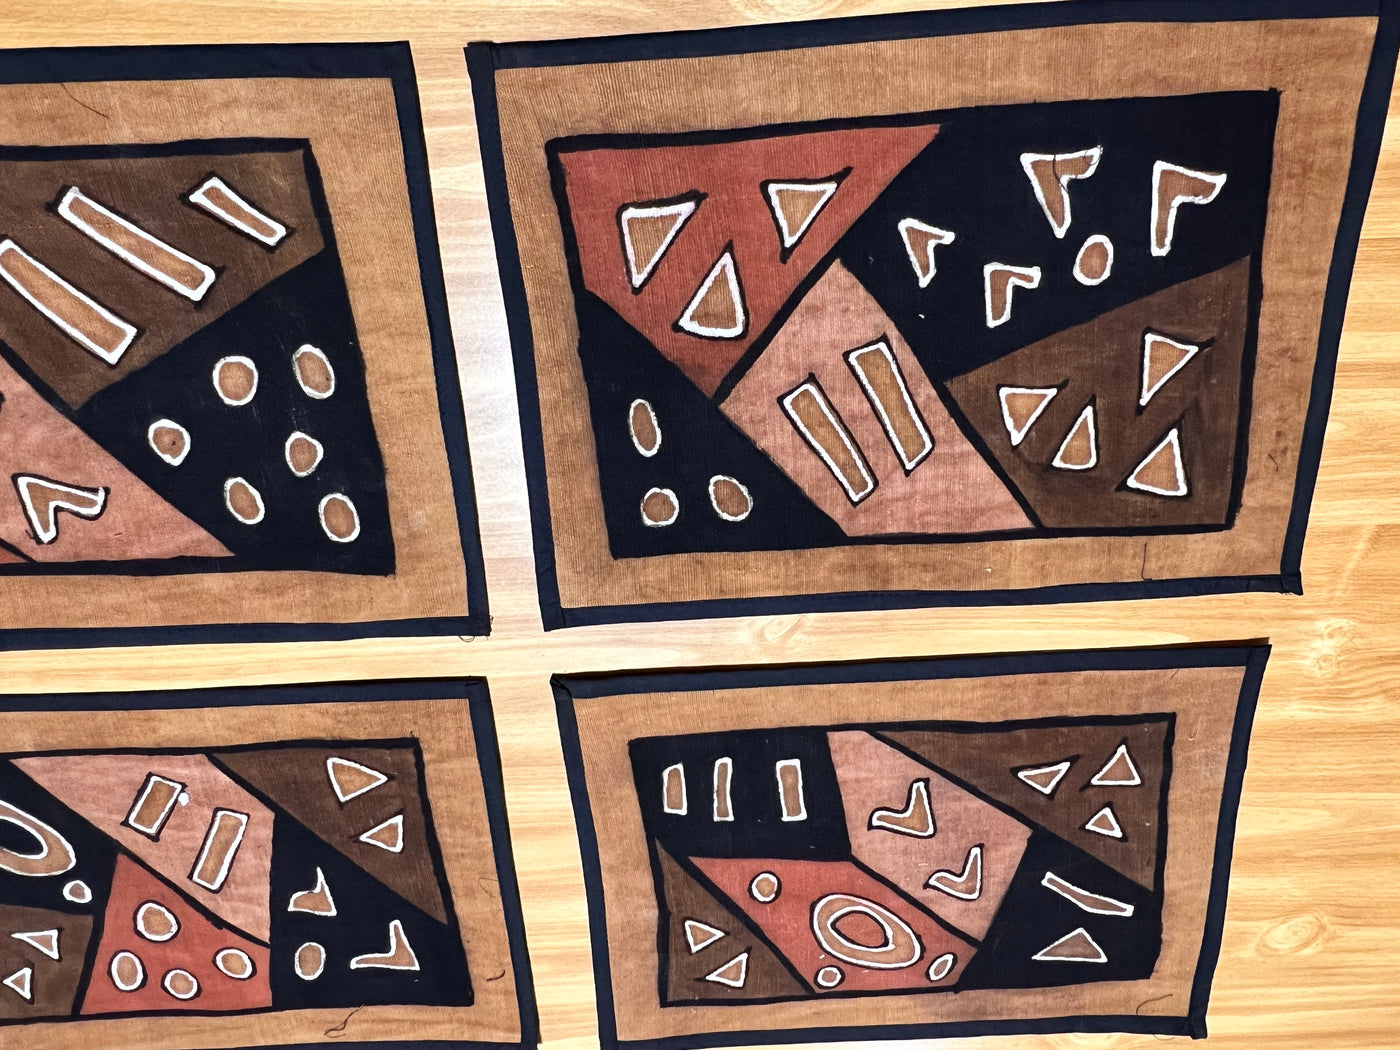 "Intricate Mudcloth Placemats: An Homage to Malian Artisans"